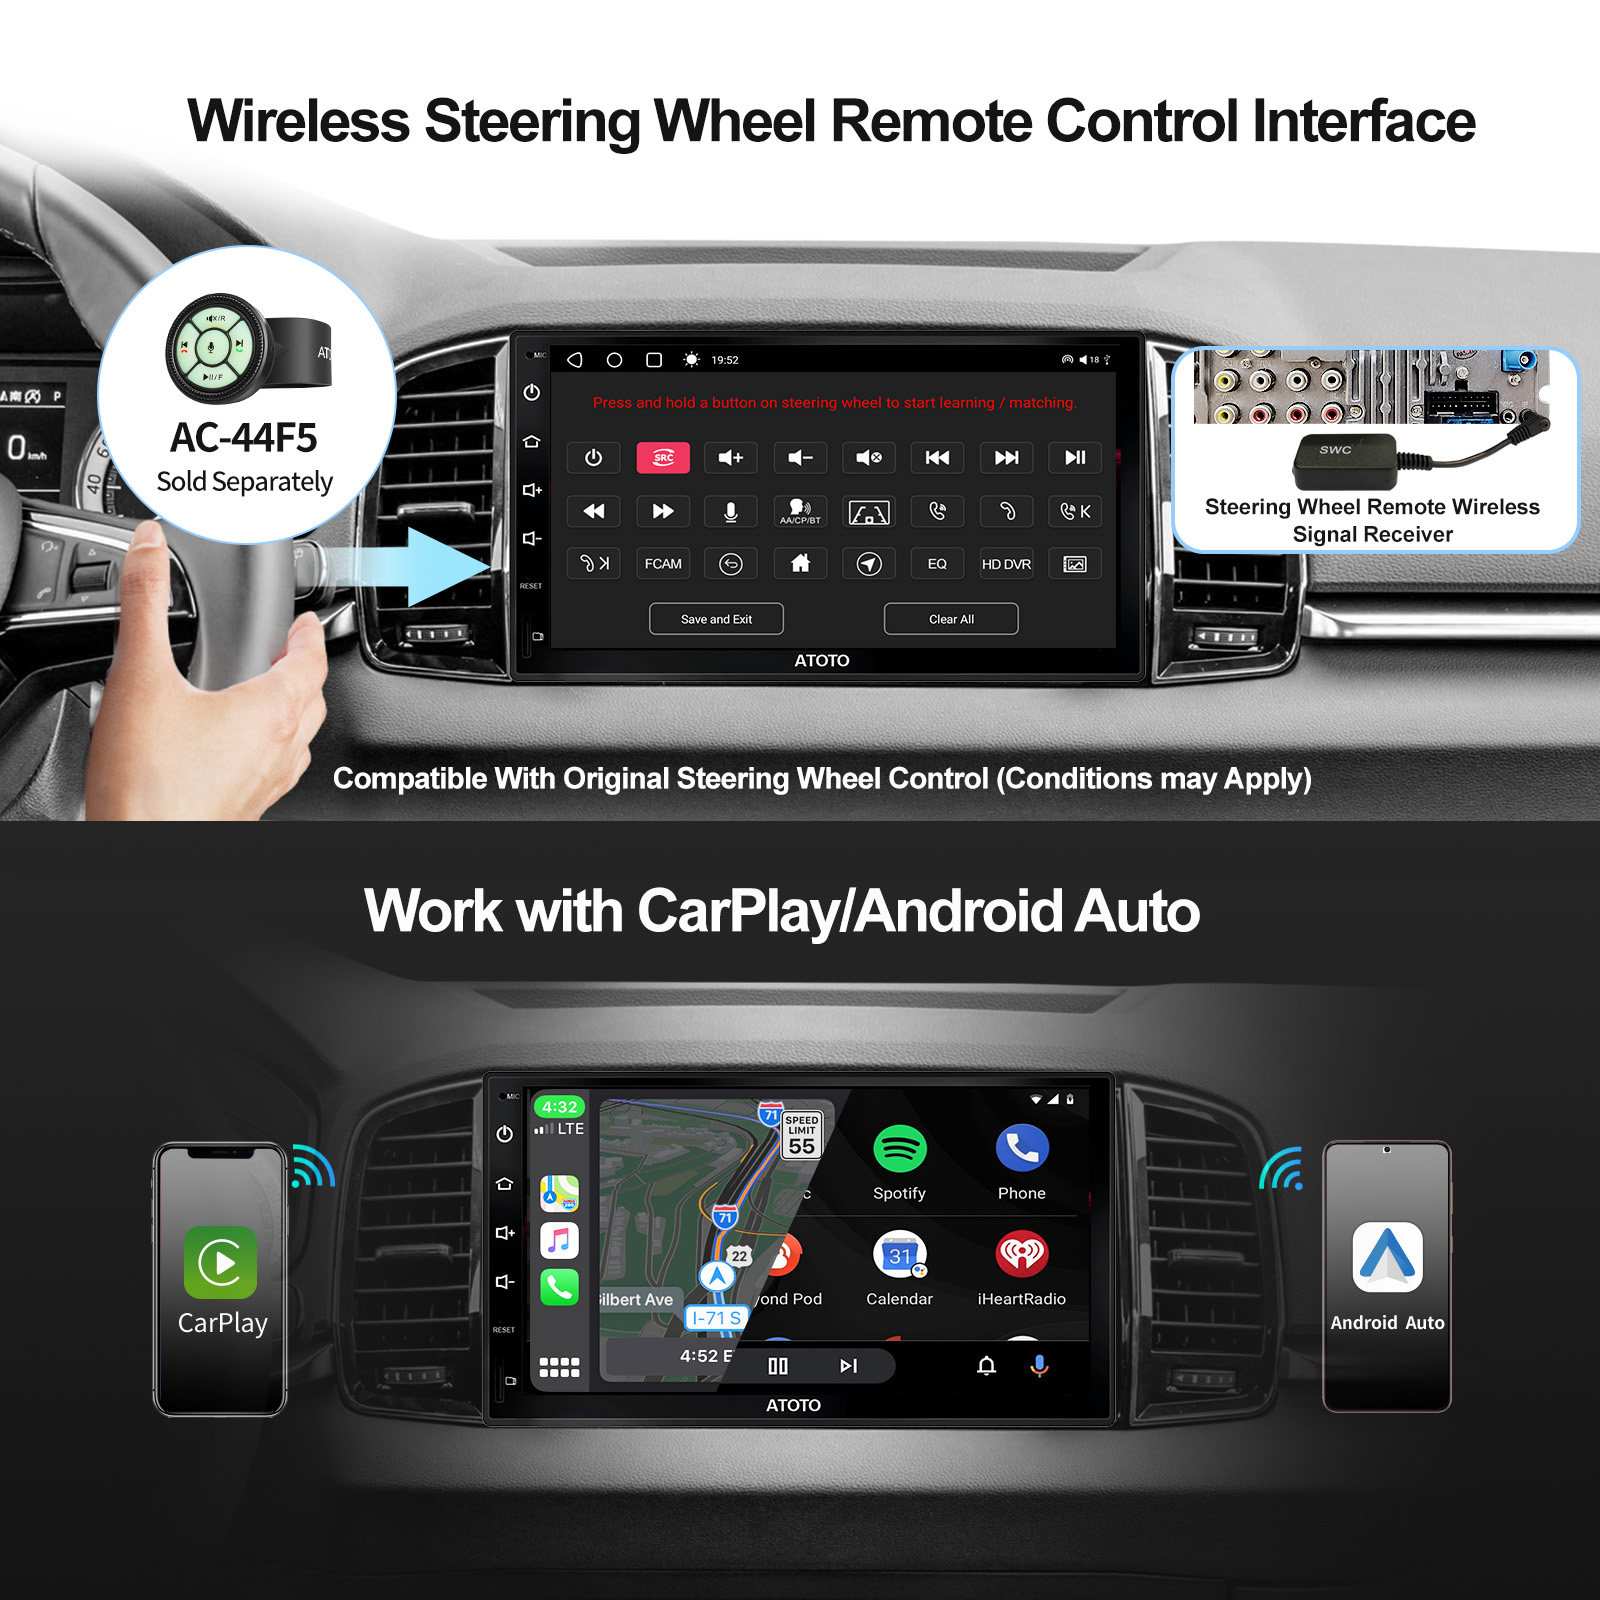 ATOTO S8G2B74PM Stereo Wireless Apple Carplay and Android Auto